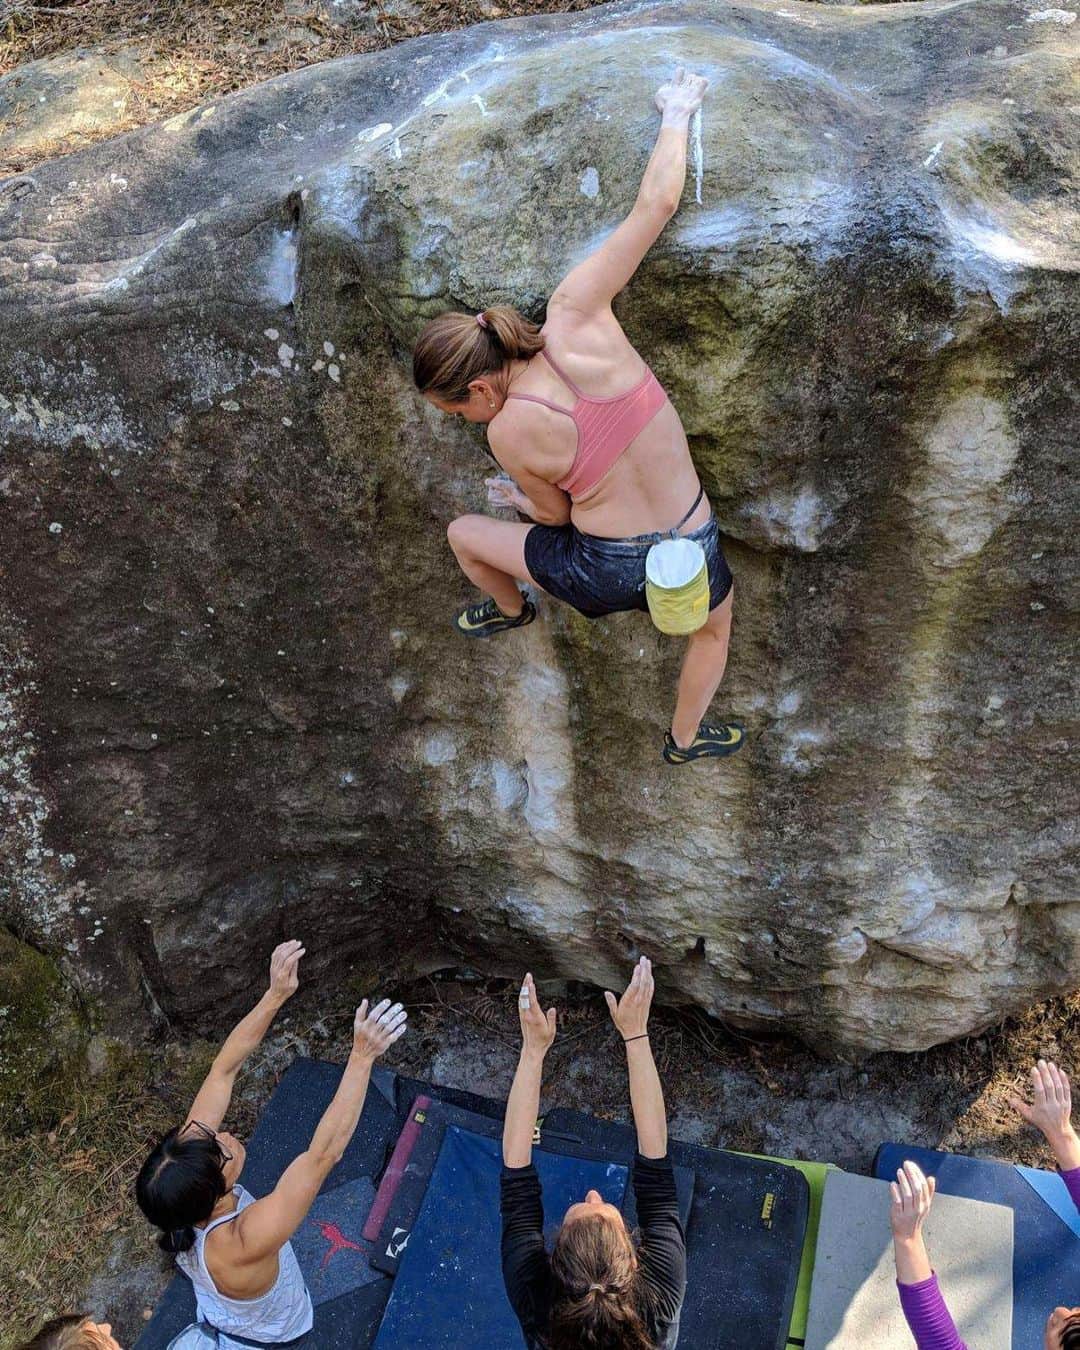 ベス・ロッデンのインスタグラム：「This winter I started working on a climb with a girlfriend. I’ve gotten much more comfortable climbing with women in my 30’s, a wonderful change. We were having a blast sharing beta and lamenting how sore we were when someone casually said "it will be a first female ascent whoever does it first" and something switched in me. It was a familiar feeling, one that I knew well but thought I had buried long ago. A relentless and ruthless drive that I never gave voice to because it felt unflattering and unbecoming.  At home I told my husband I didn't like this feeling. I knew that my competitiveness was real, that I did have true a desire to push myself, I thought it's just what set aside greatness from normalcy. But as I started to ask myself why it meant so much to me, I realized part of it was actually a fear of being left behind or alone. If my friend did it first, then I'd be forgotten, like I wouldn't matter, that she'd get all the praise and people would like her more. A lot of my self worth came from success in climbing. Vocalizing it made it seem small and sad because I knew that if my friend (one who brought me food in my darkest postpartum days and took my baby so I could get a precious hour of sleep) did it first none of my fears would actually come true, she’d be there to support me after.  It all seems so simple and normal and sad but true. And maybe for some people these feelings never exist, but I know when I started climbing there were few women in the sport, and even fewer climbing together. I always wondered if it was because we all shared this amazing and ruthless drive to push the sport forward and be the best at our respective disciplines. But now I wonder if we were all just wanting to be seen and loved and if we had been there for each other how much of a force we could have been together.  Neither of us did the climb this winter, but understanding where these feelings came from helped me derive as much joy in her progress as mine. What a gift.  Pic: Climbing in Fontainebleau with all the amazing ladies @outdoorresearch @metoliusclimbing @touchstoneclimbing @bluewaterropes @skinourishment @ospreypacks @clifbar @lasportivana #orambassador」